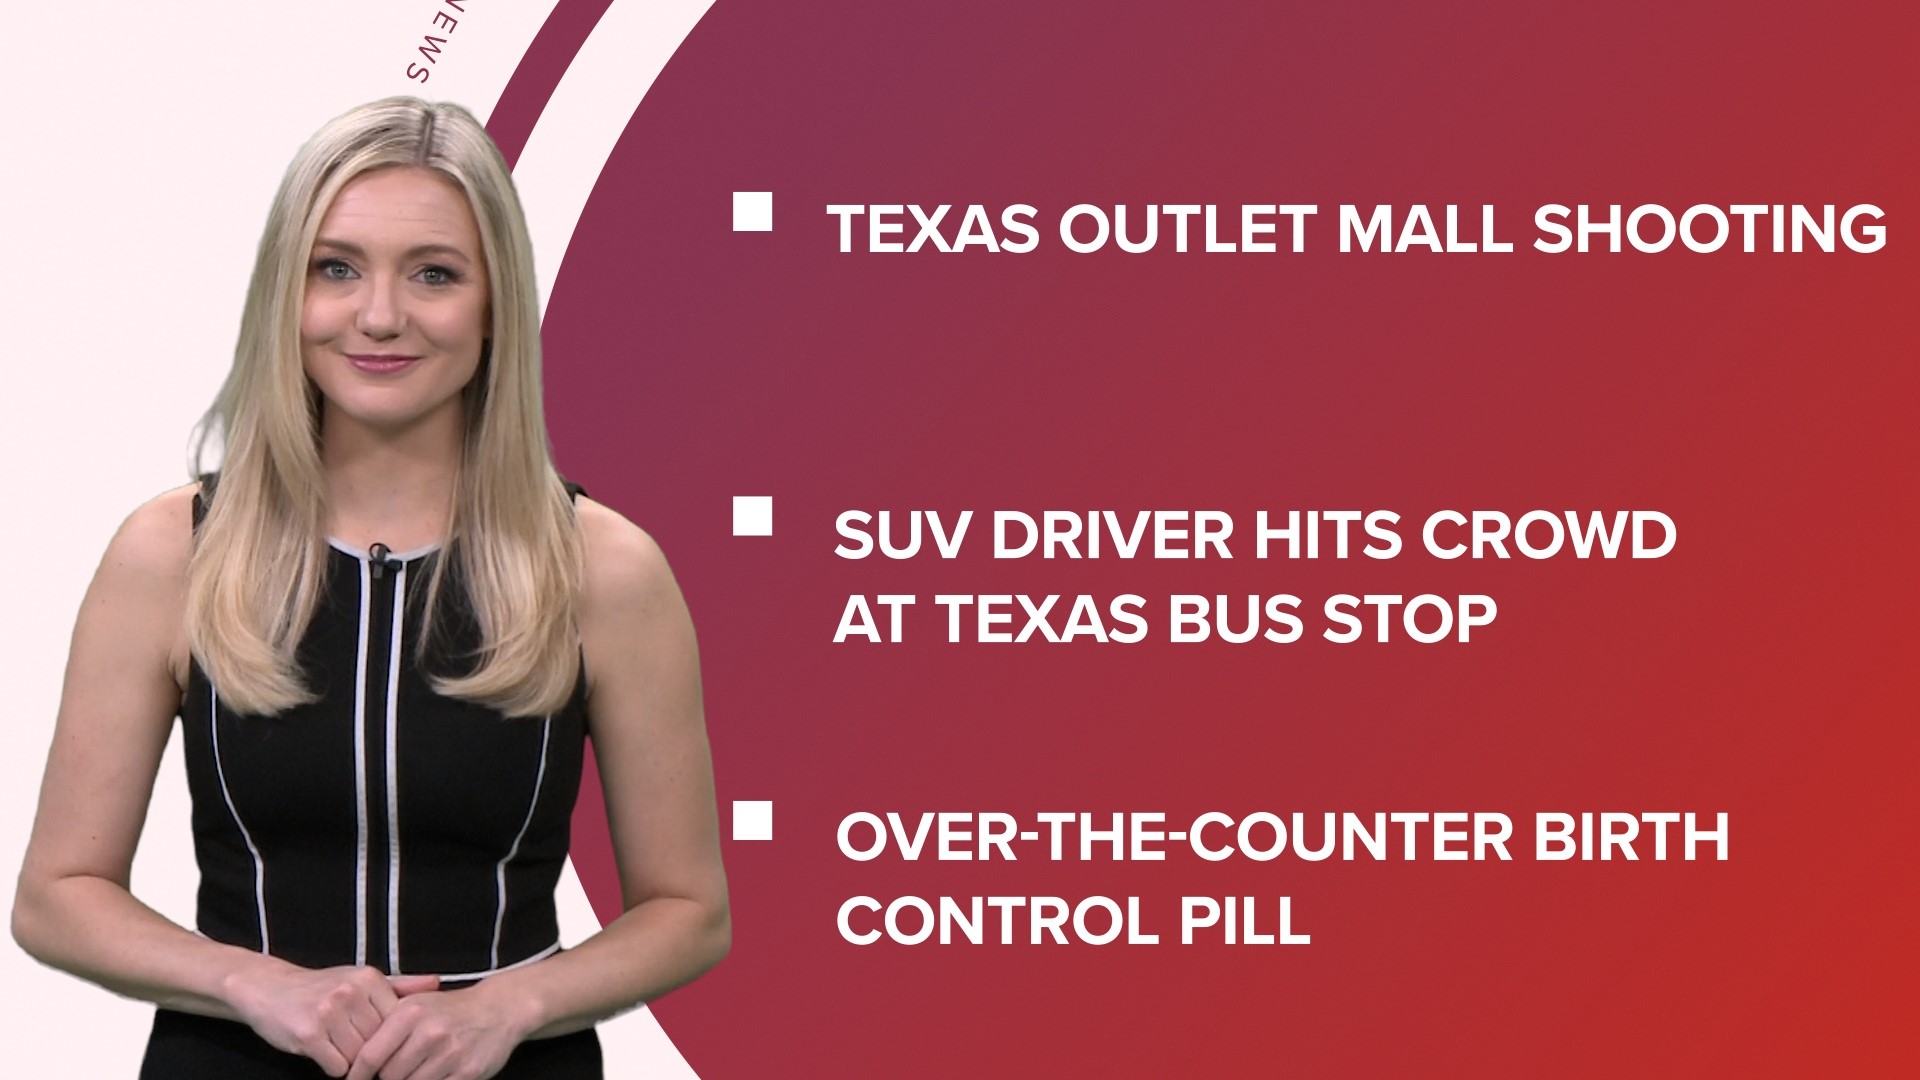 A look at what is happening in the news from a deadly mass shooting at a Texas outlet mall to an FDA committee discussing over-the-counter birth control.